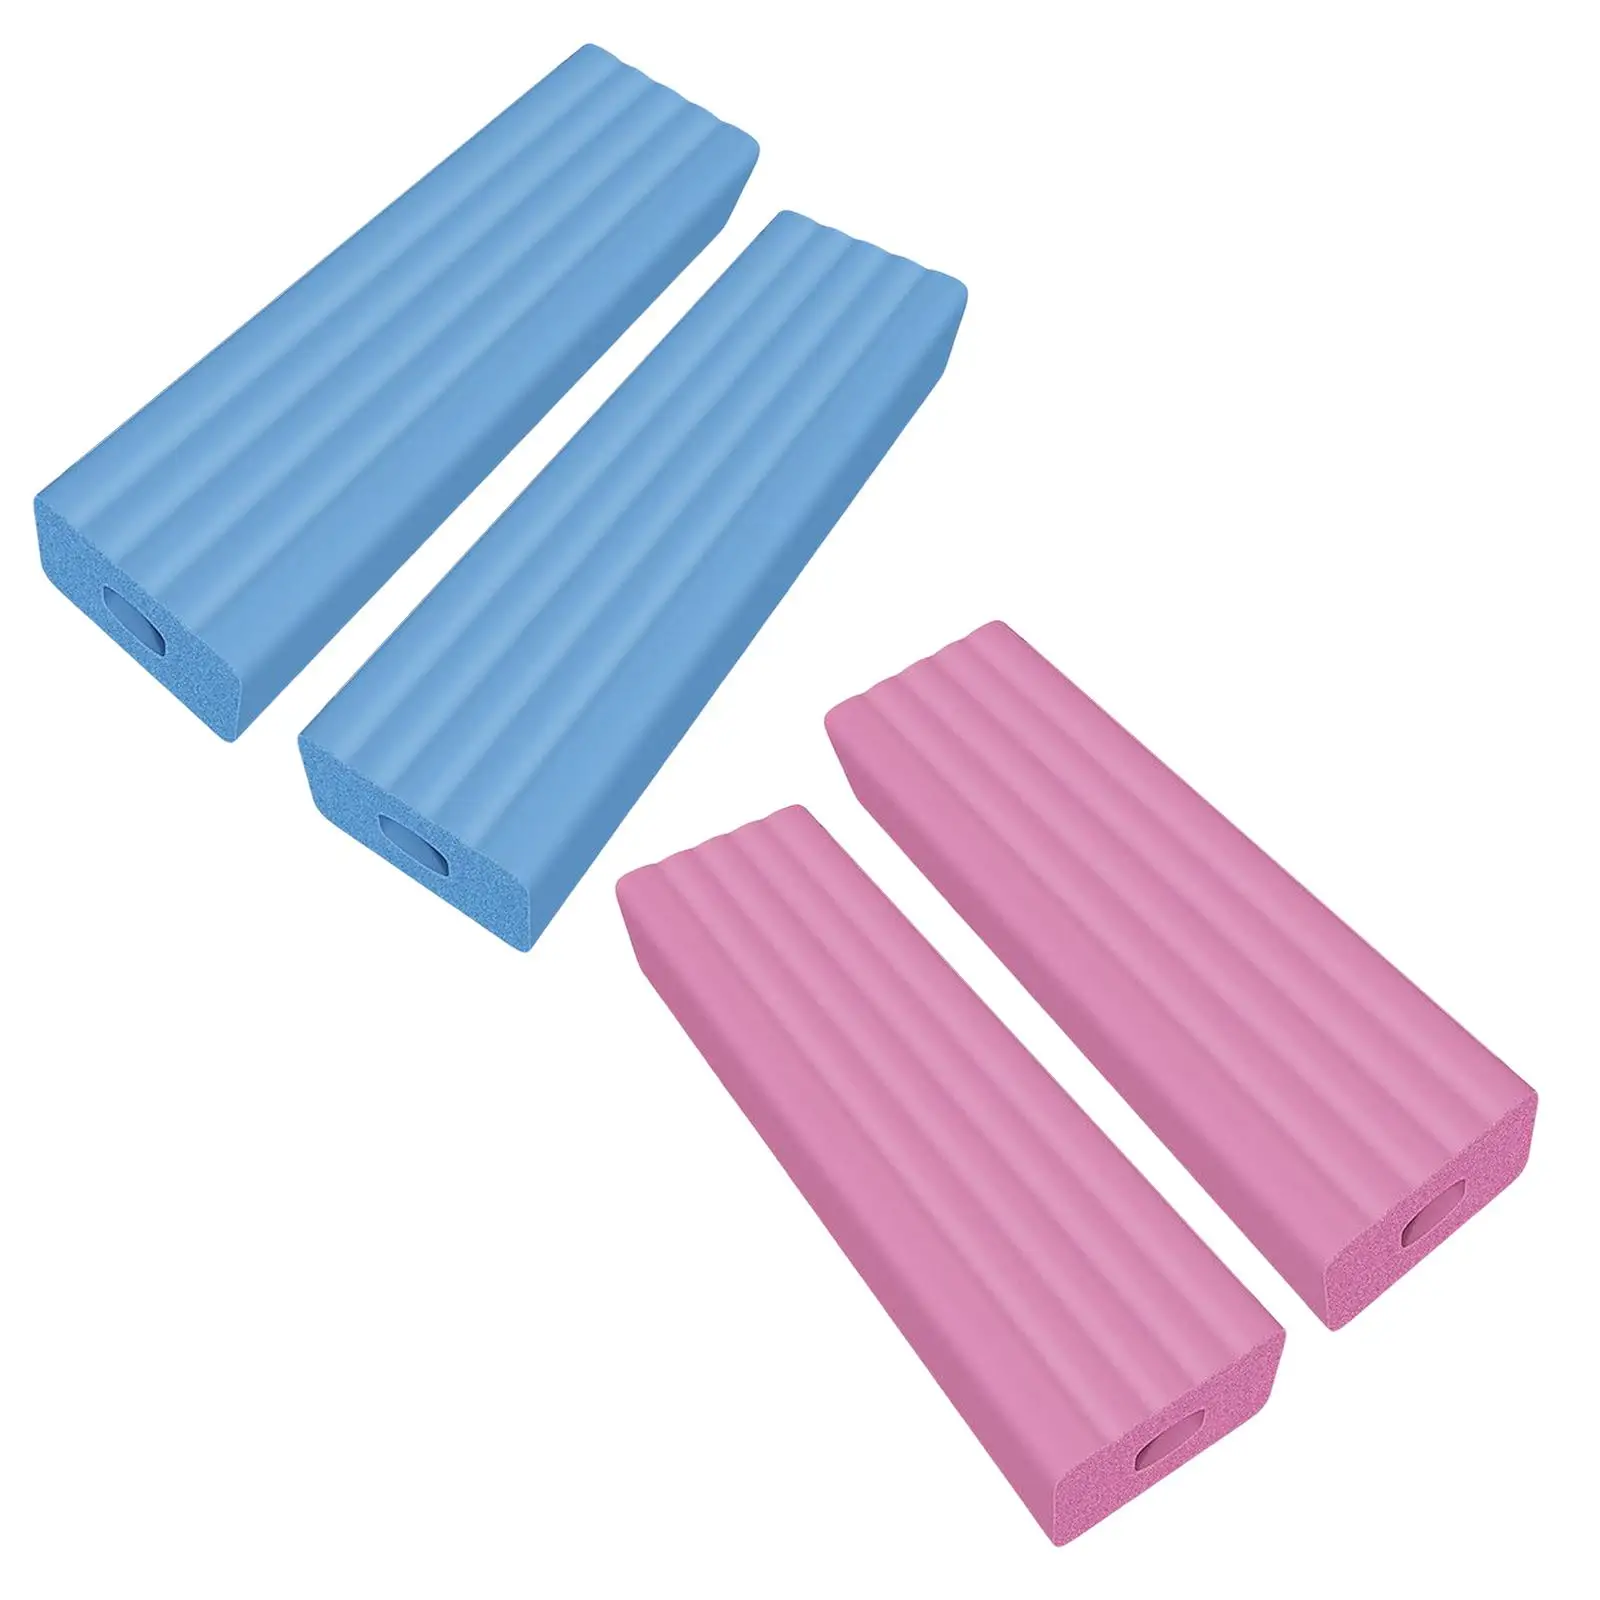 Foam Rubber Barbell Cushion Pads Holder Load Unload Weight Plates Durable ,Easy to Clean and Store for Fitness Exercise